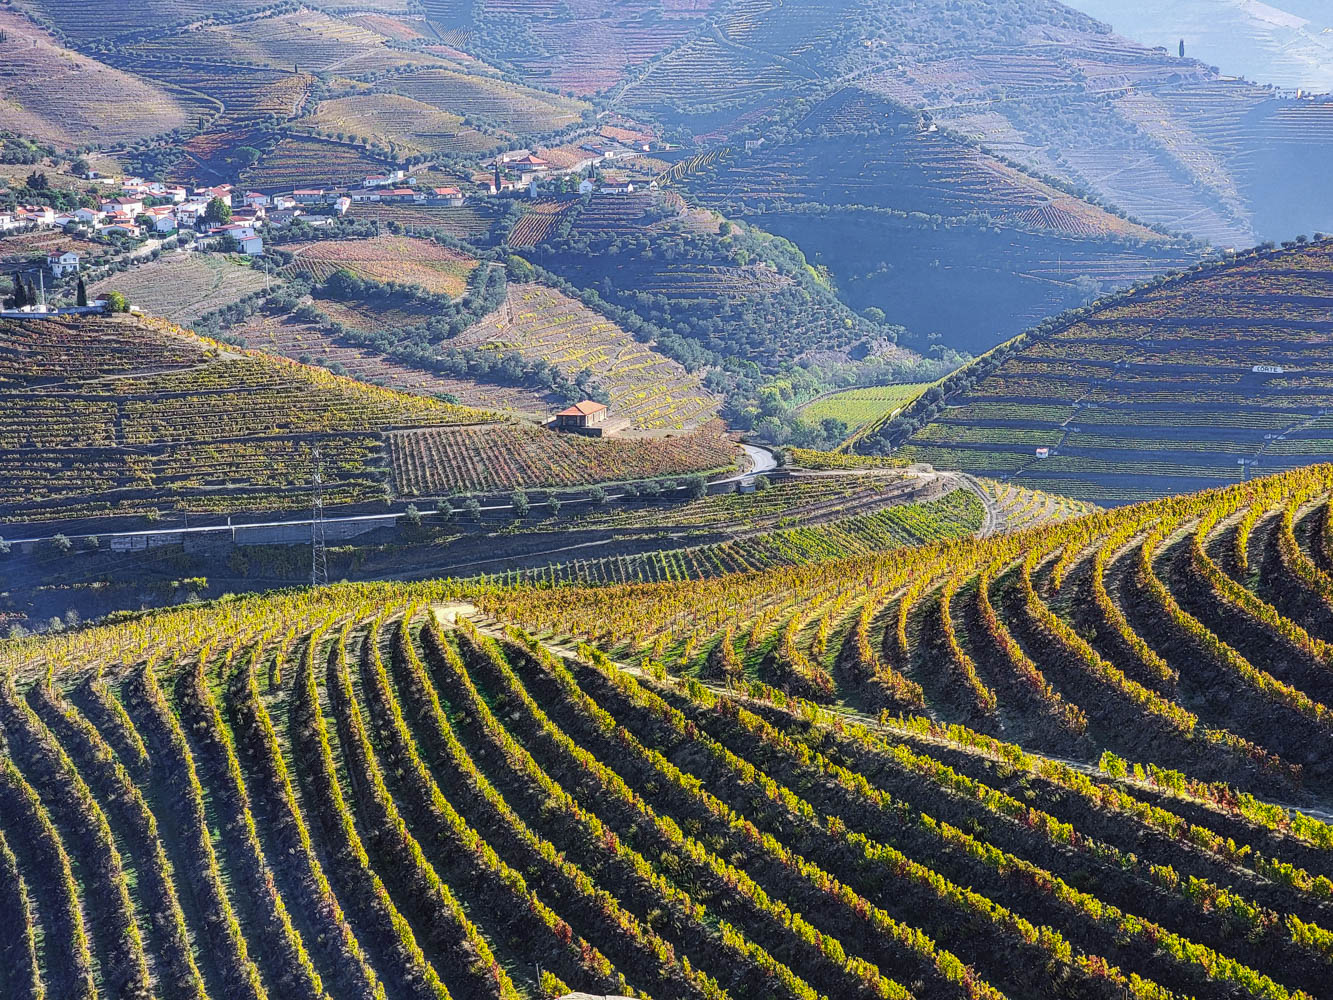 Driving in the Douro Valley is Terrifying